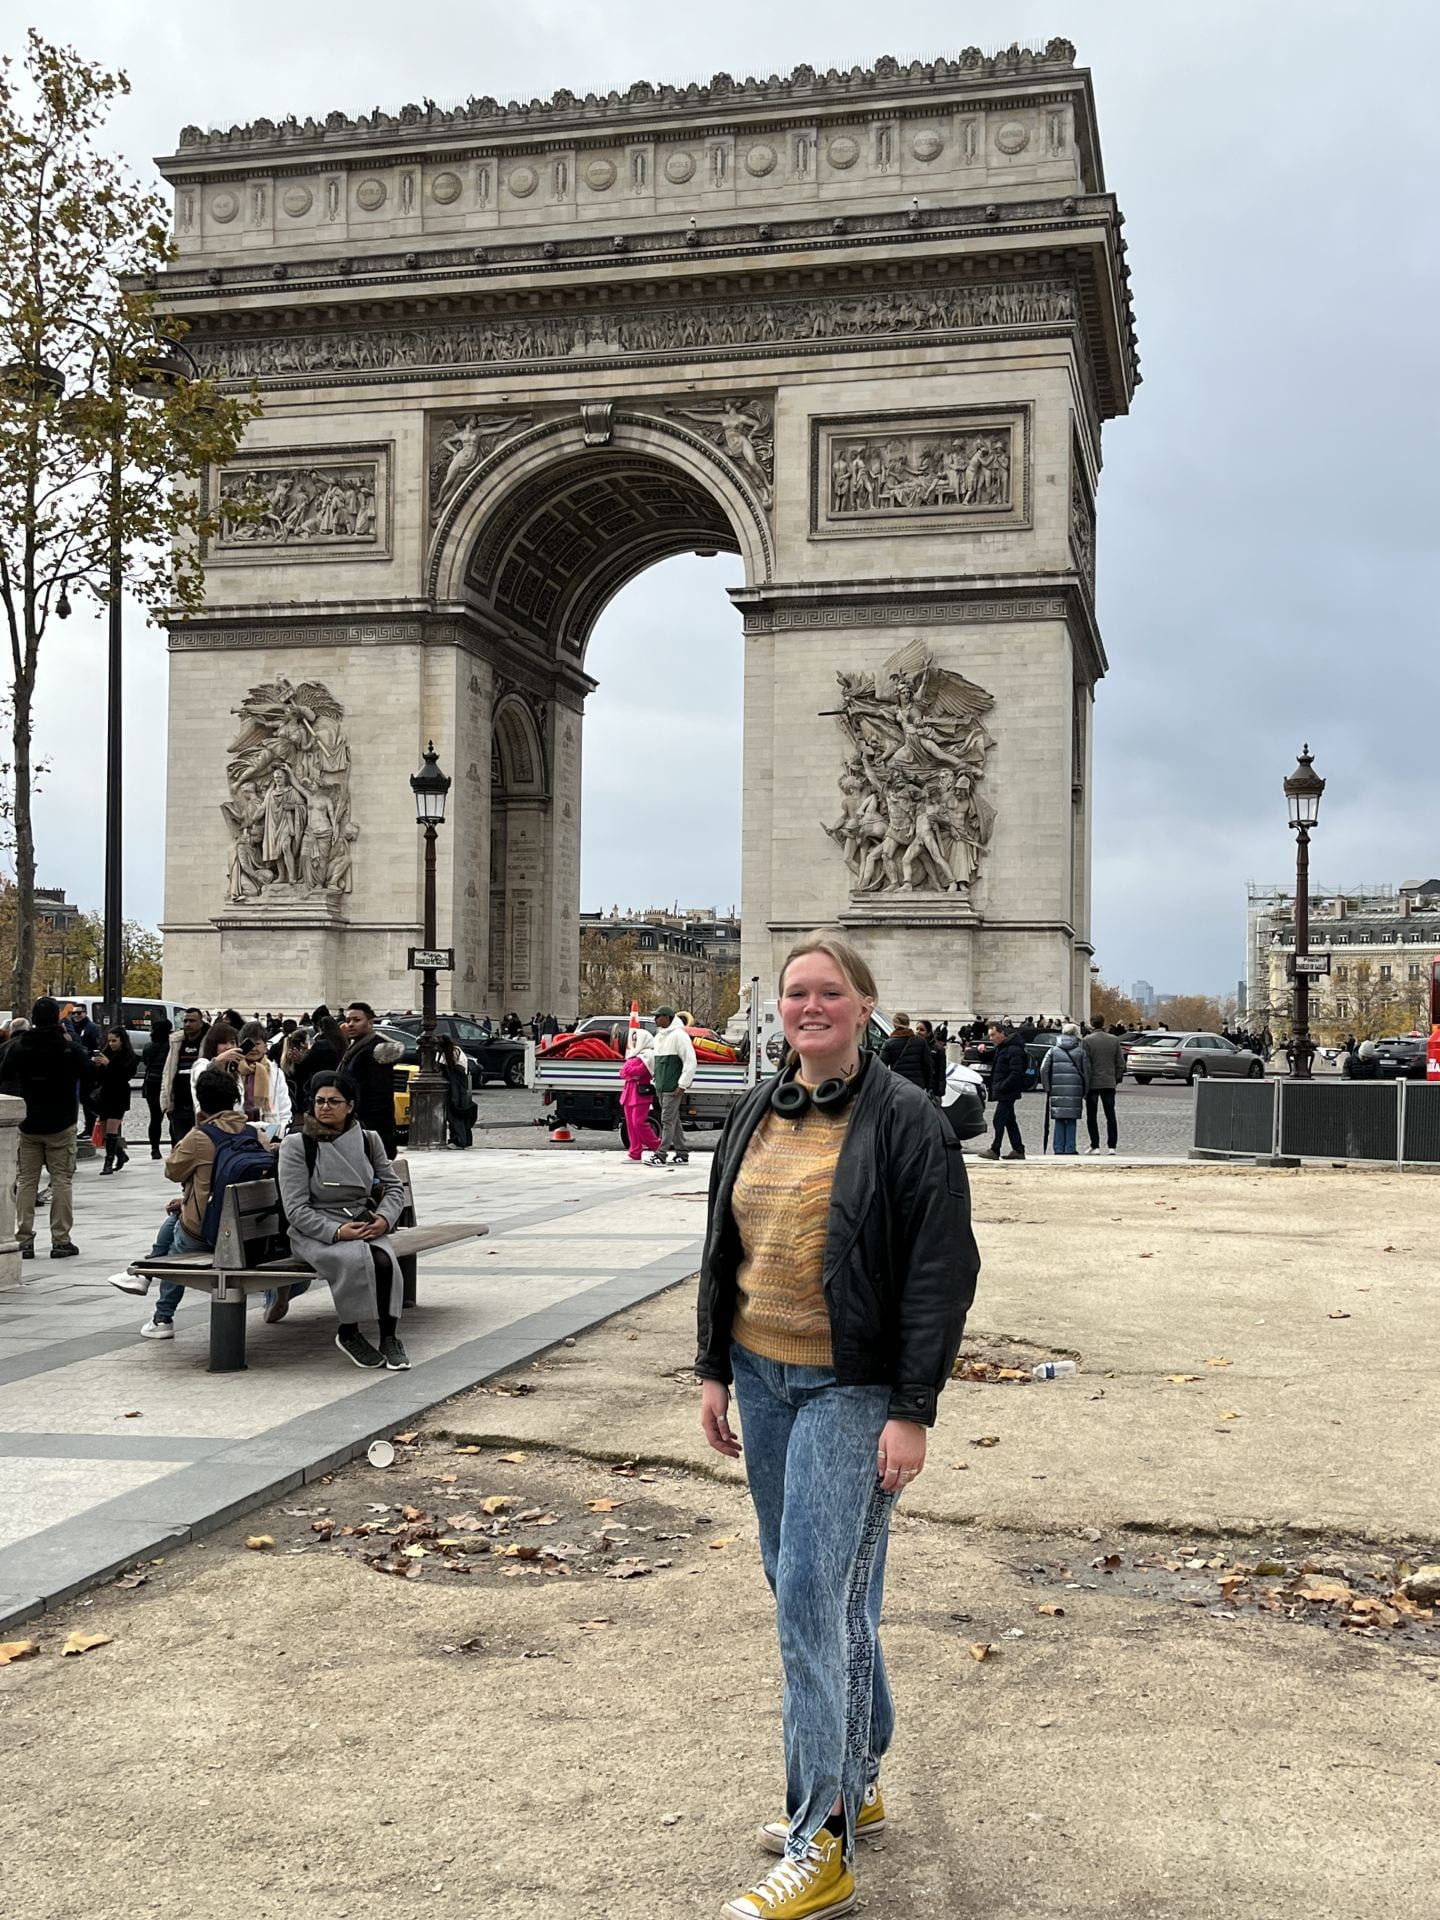 a smiling New Paltz student standing in front of L'arc de triomphe in Paris, France